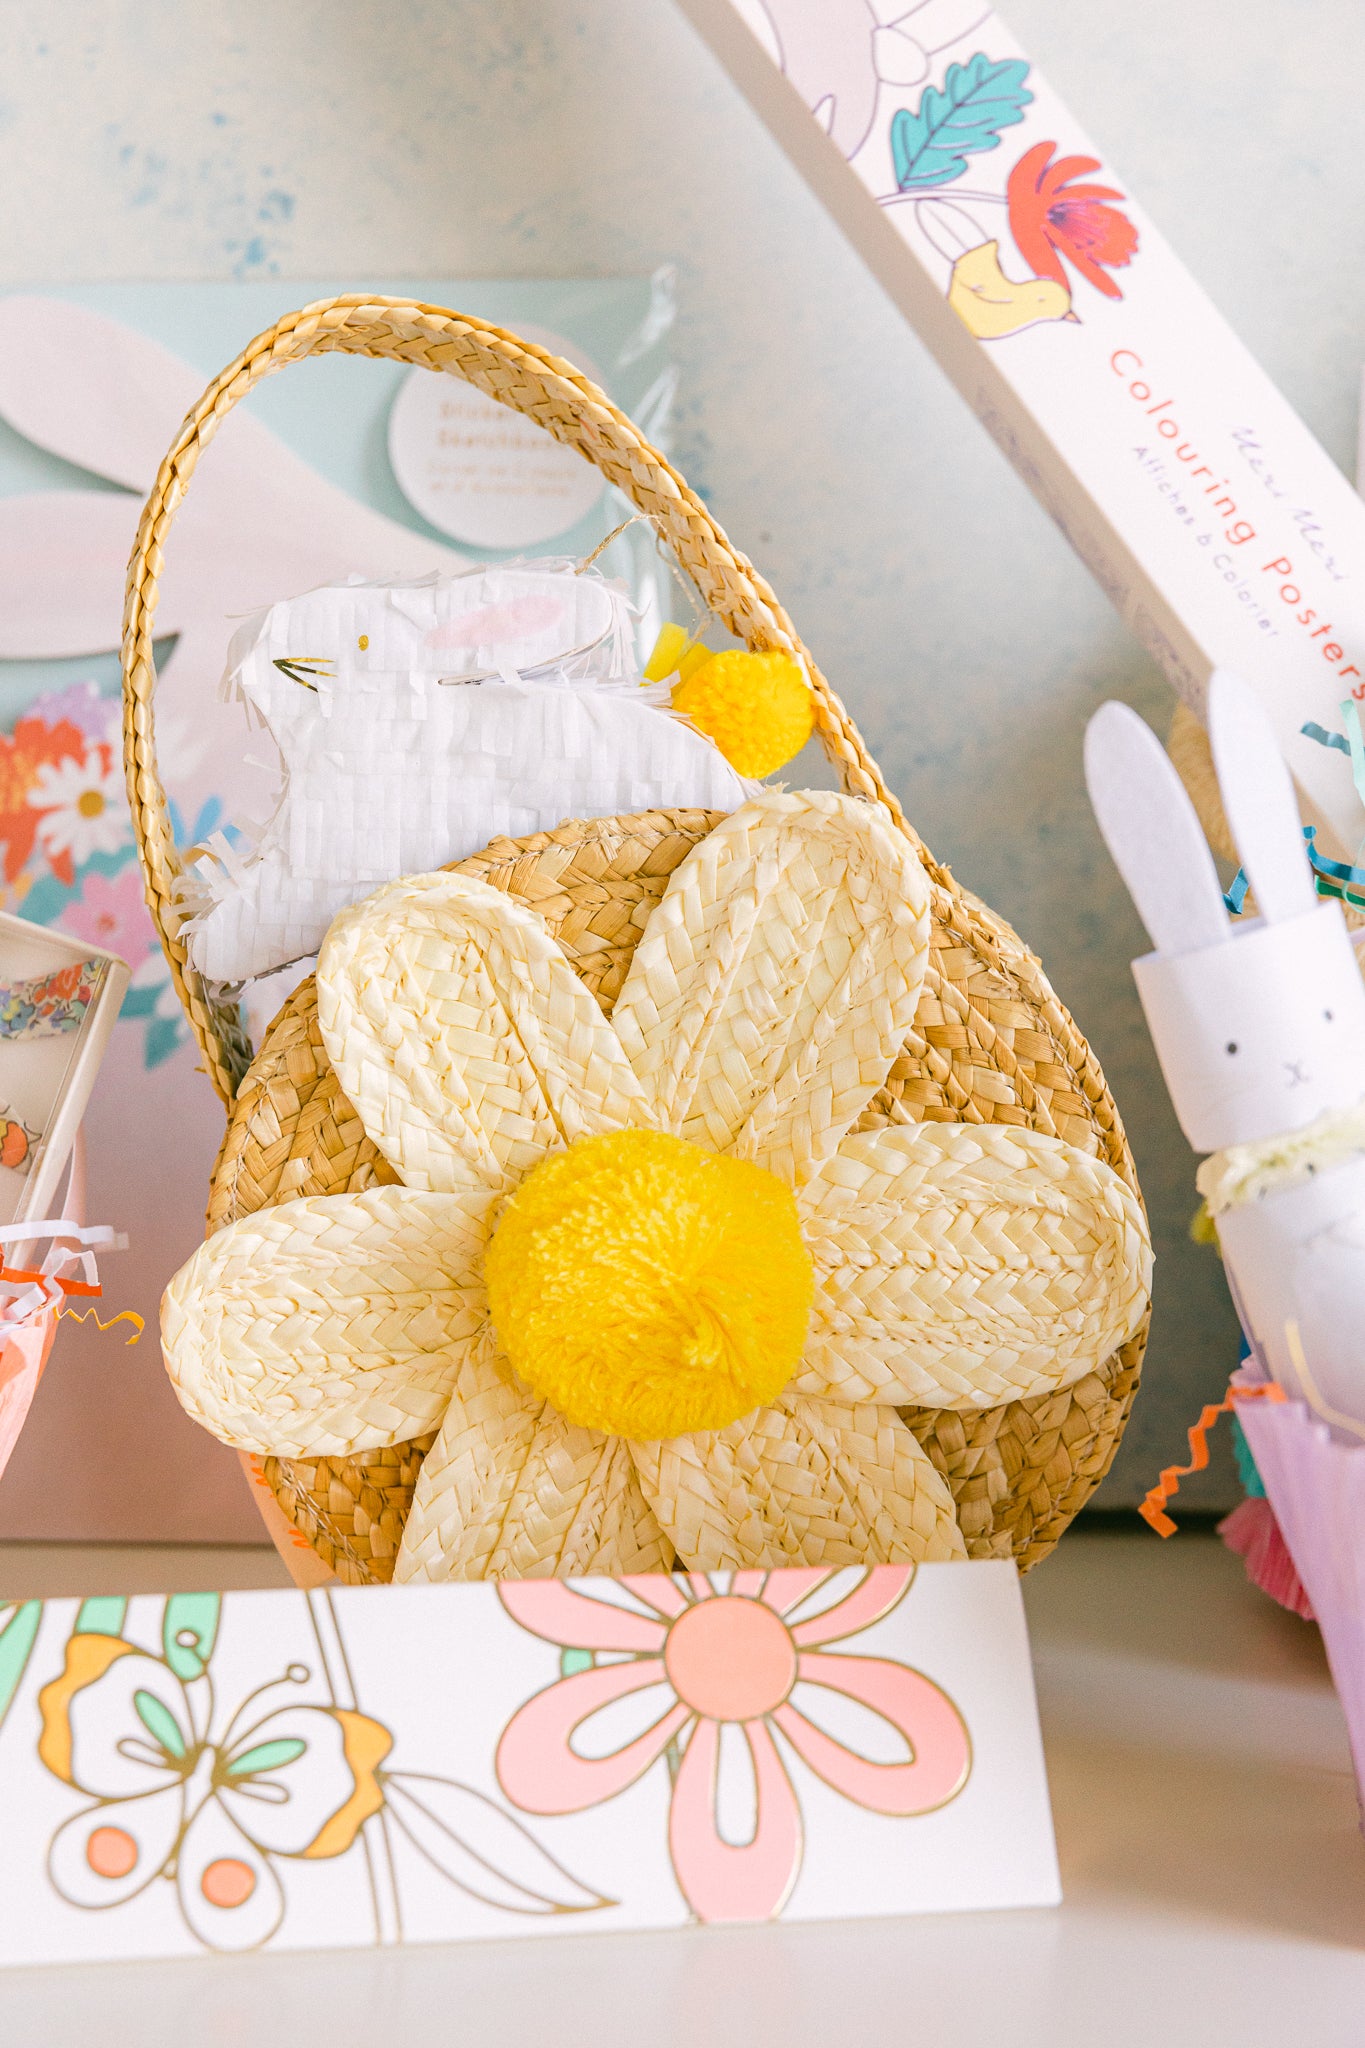 Spring wicker bag used as a fun Easter basket idea